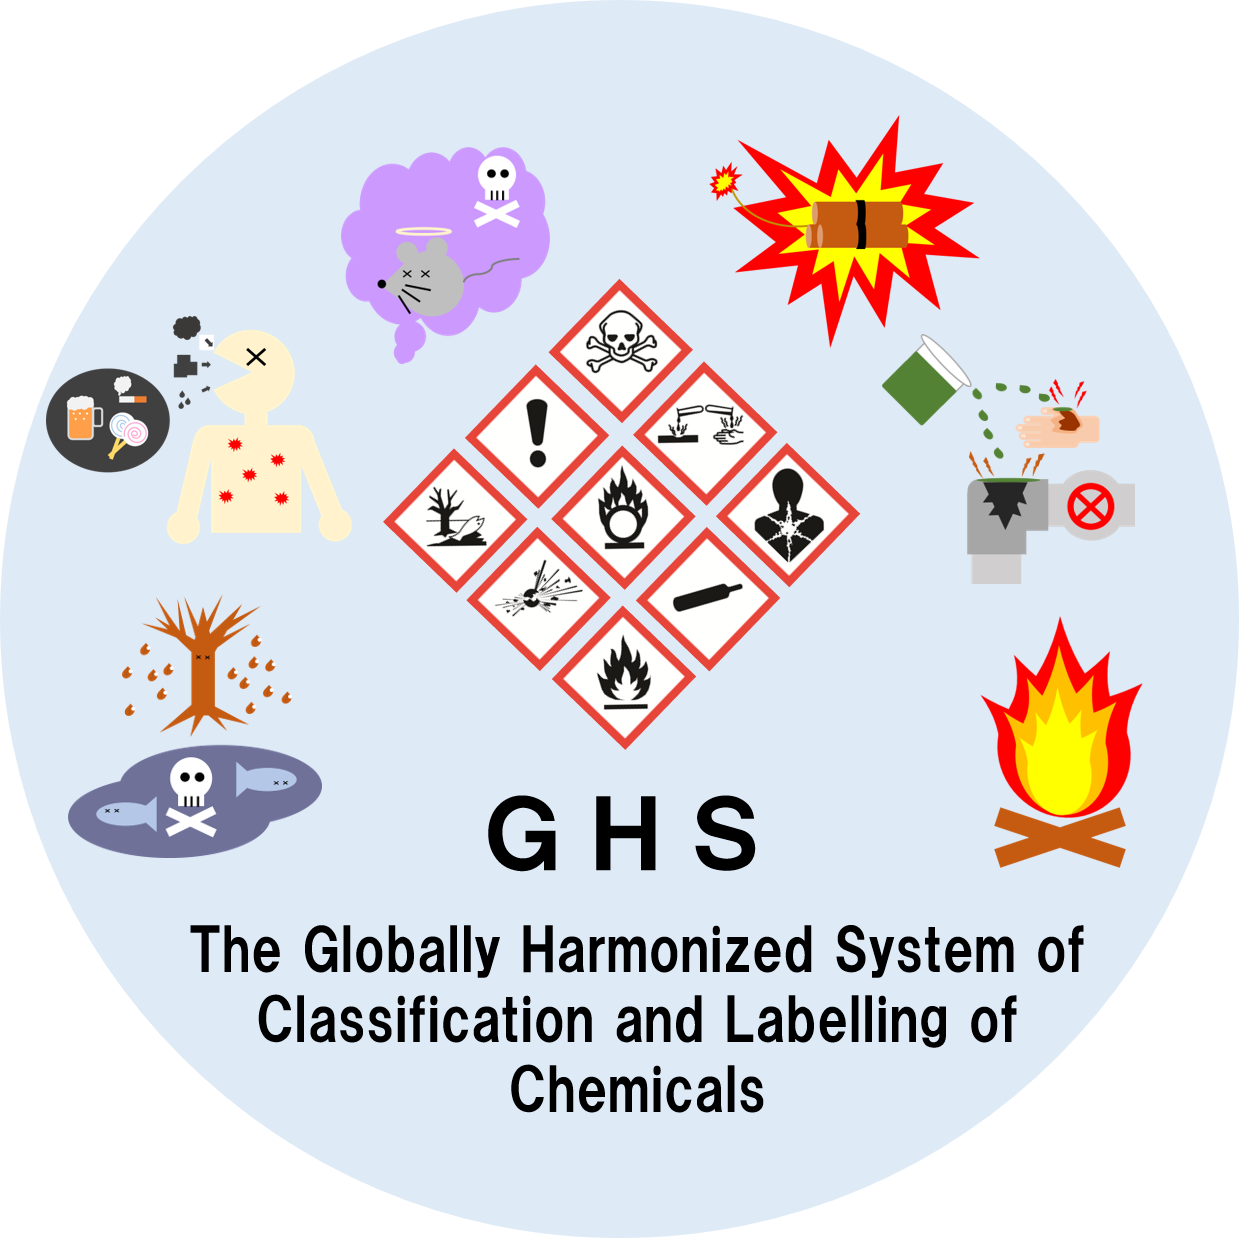 The Globally Hamonized System of Classification and Labelling of Chemicals